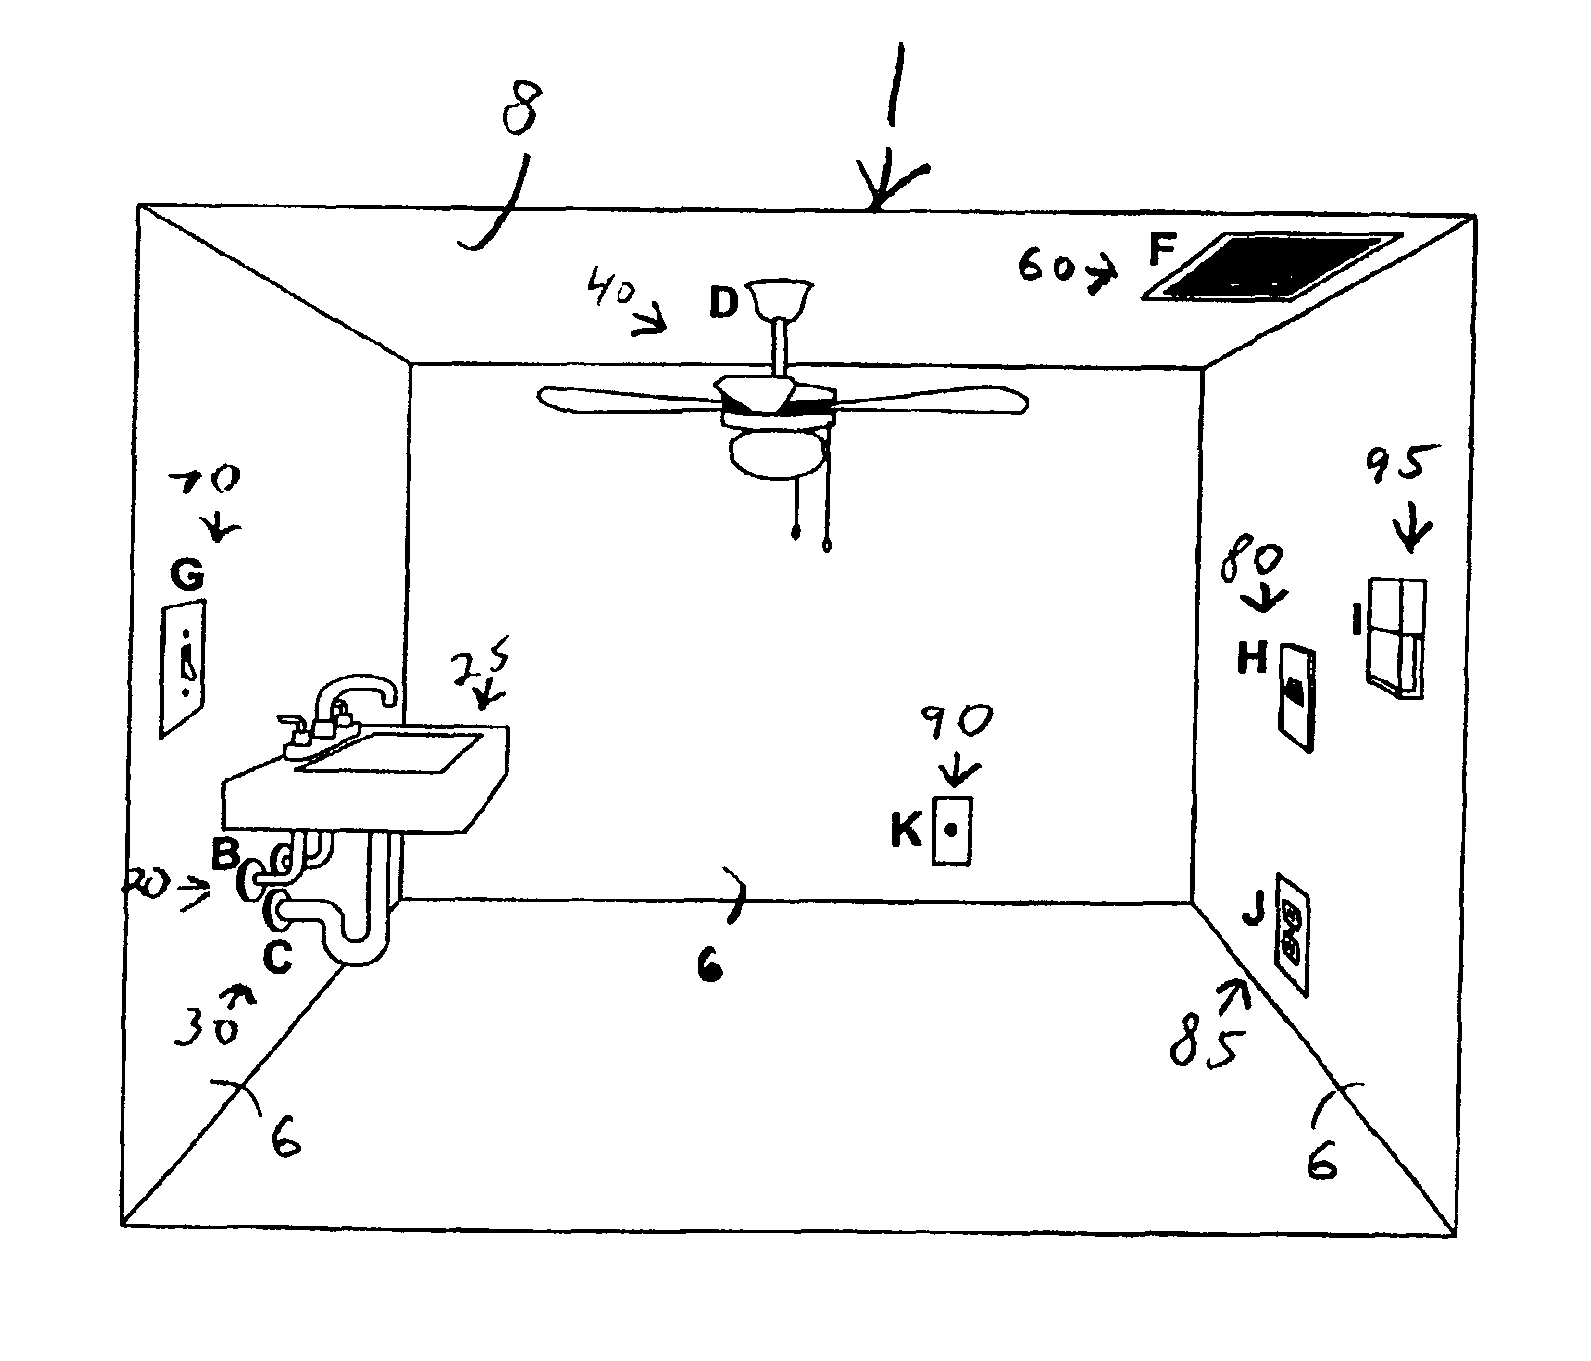 Methods and devices for impeding crawling arthropods from entering enclosed and semi-enclosed spaces